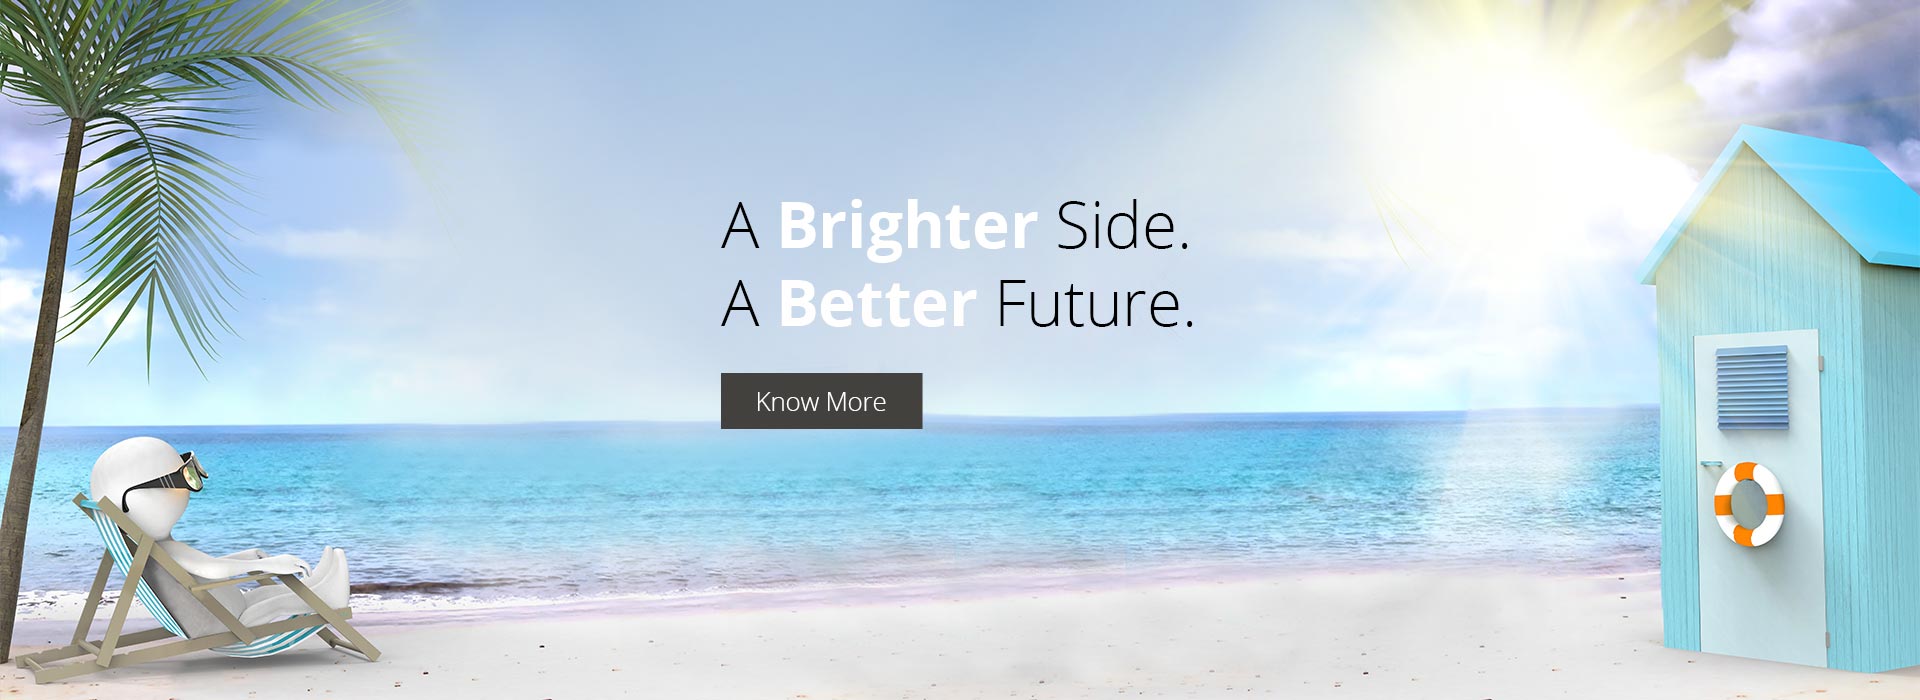 A Brighter Side. A Better Future